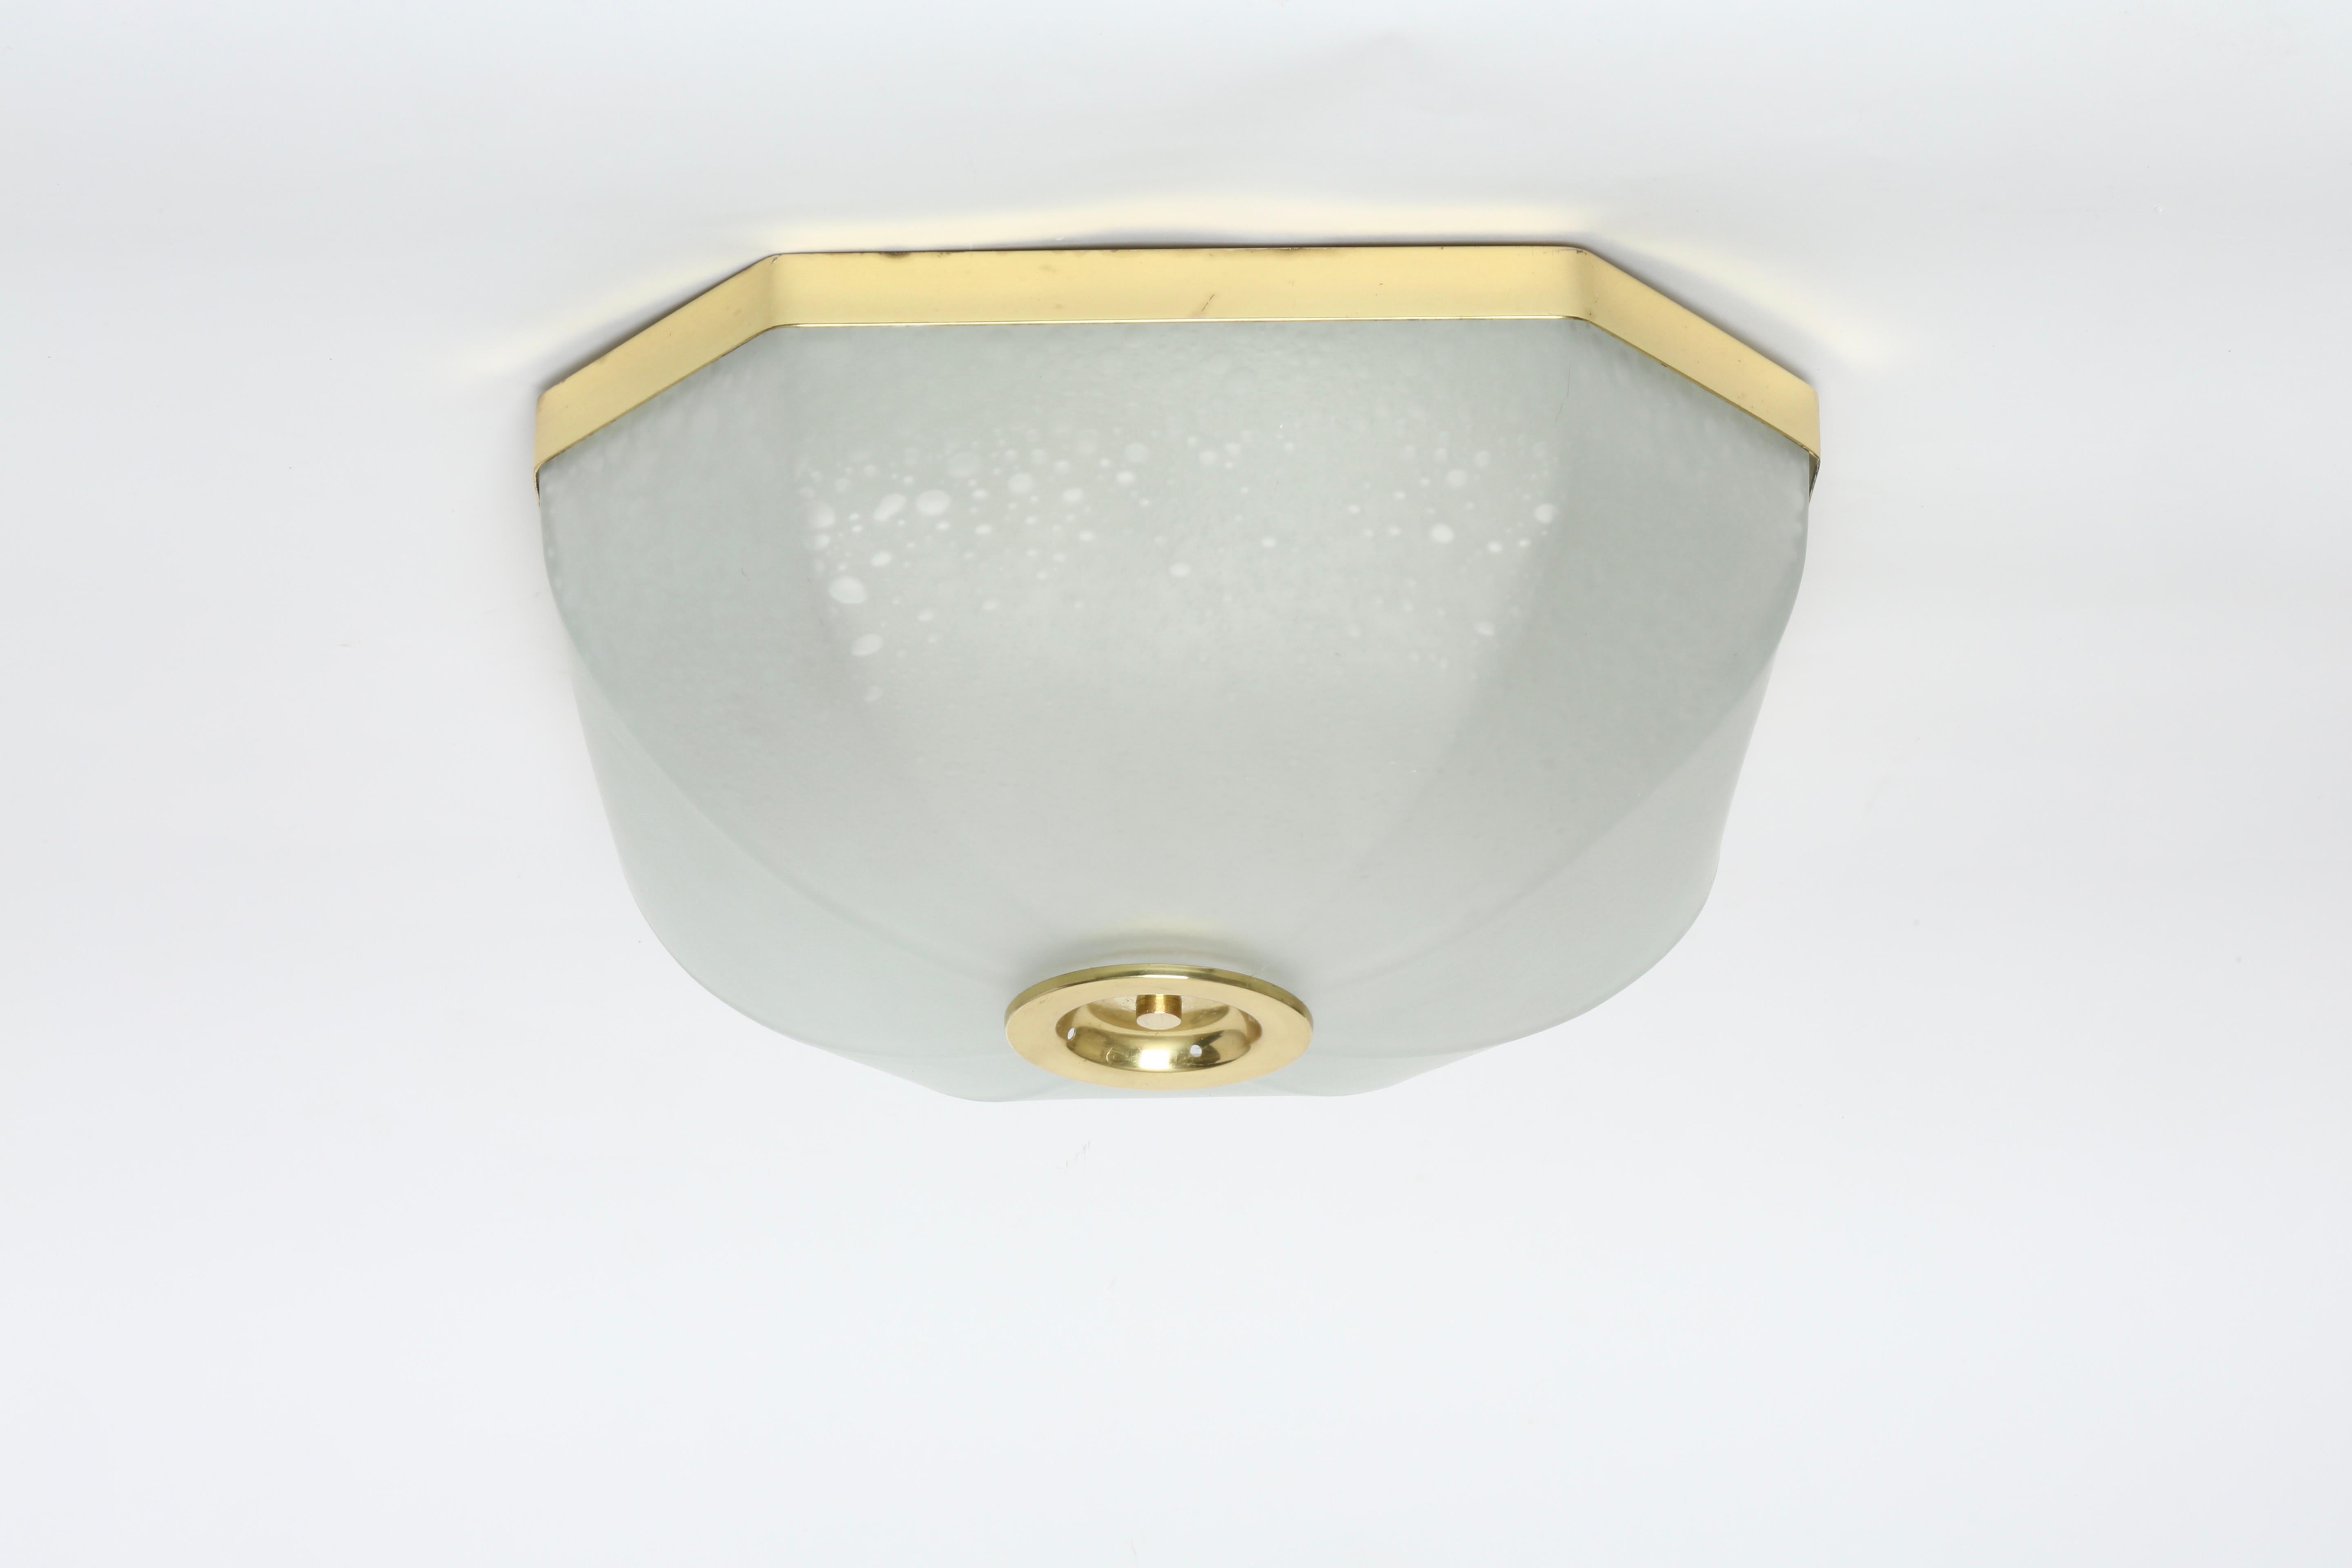 Flush mount ceiling light by Lumi.
Made in Italy, in 1950s.
Label present.
Four standard Edison bulbs.
Complimentary US rewiring upon request.
Two flush mounts available.

We take pride in bringing vintage fixtures to their full glory again.
At